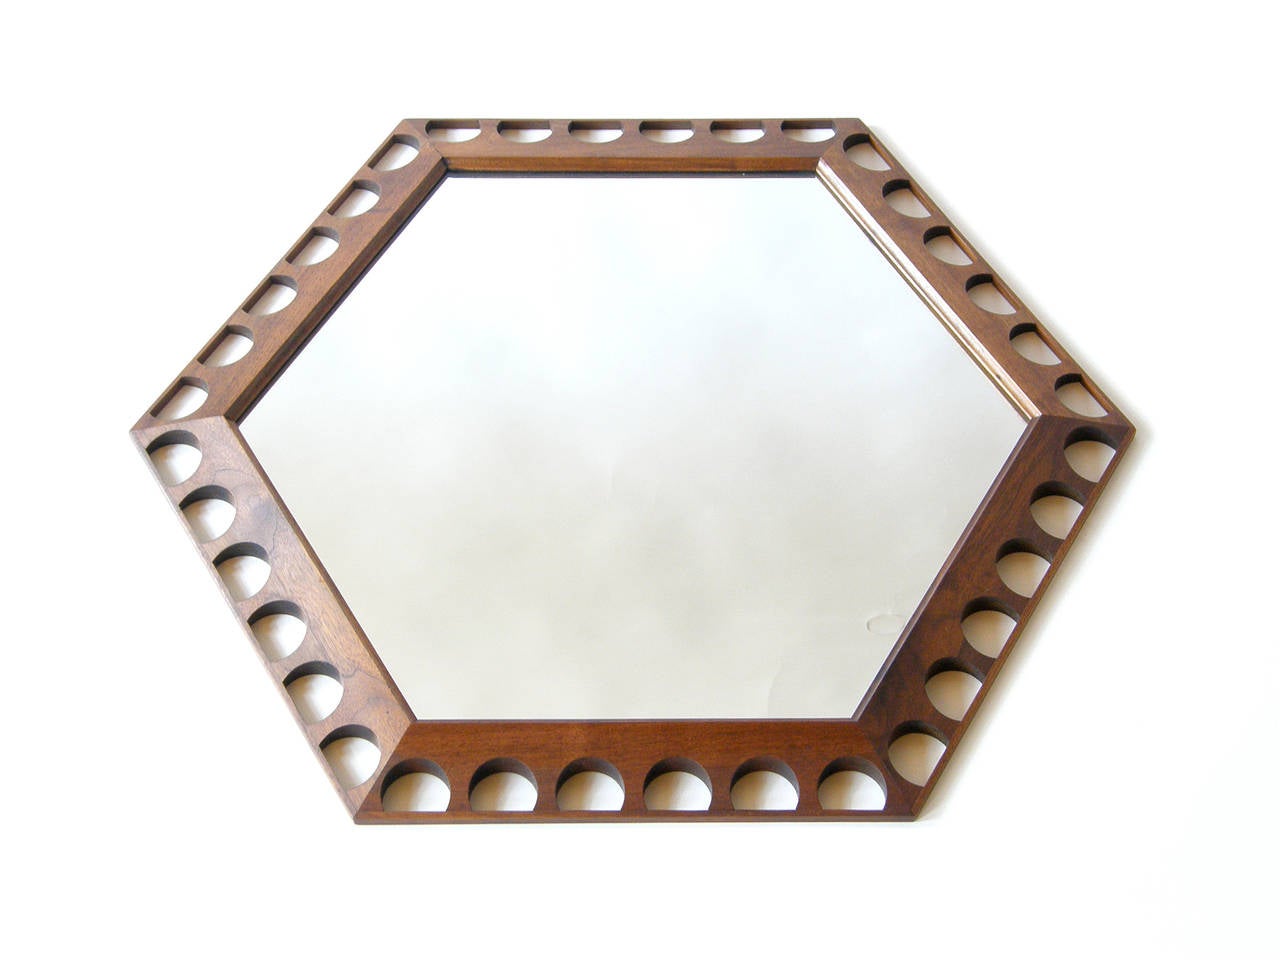 Hexagonal wall mirror designed by George Nelson and made by Howard Miller. The walnut frame is beveled and pierced by semi-circular shapes.

The measurements given correspond to the orientation of the mirror in photo #2. The hanging wire is set